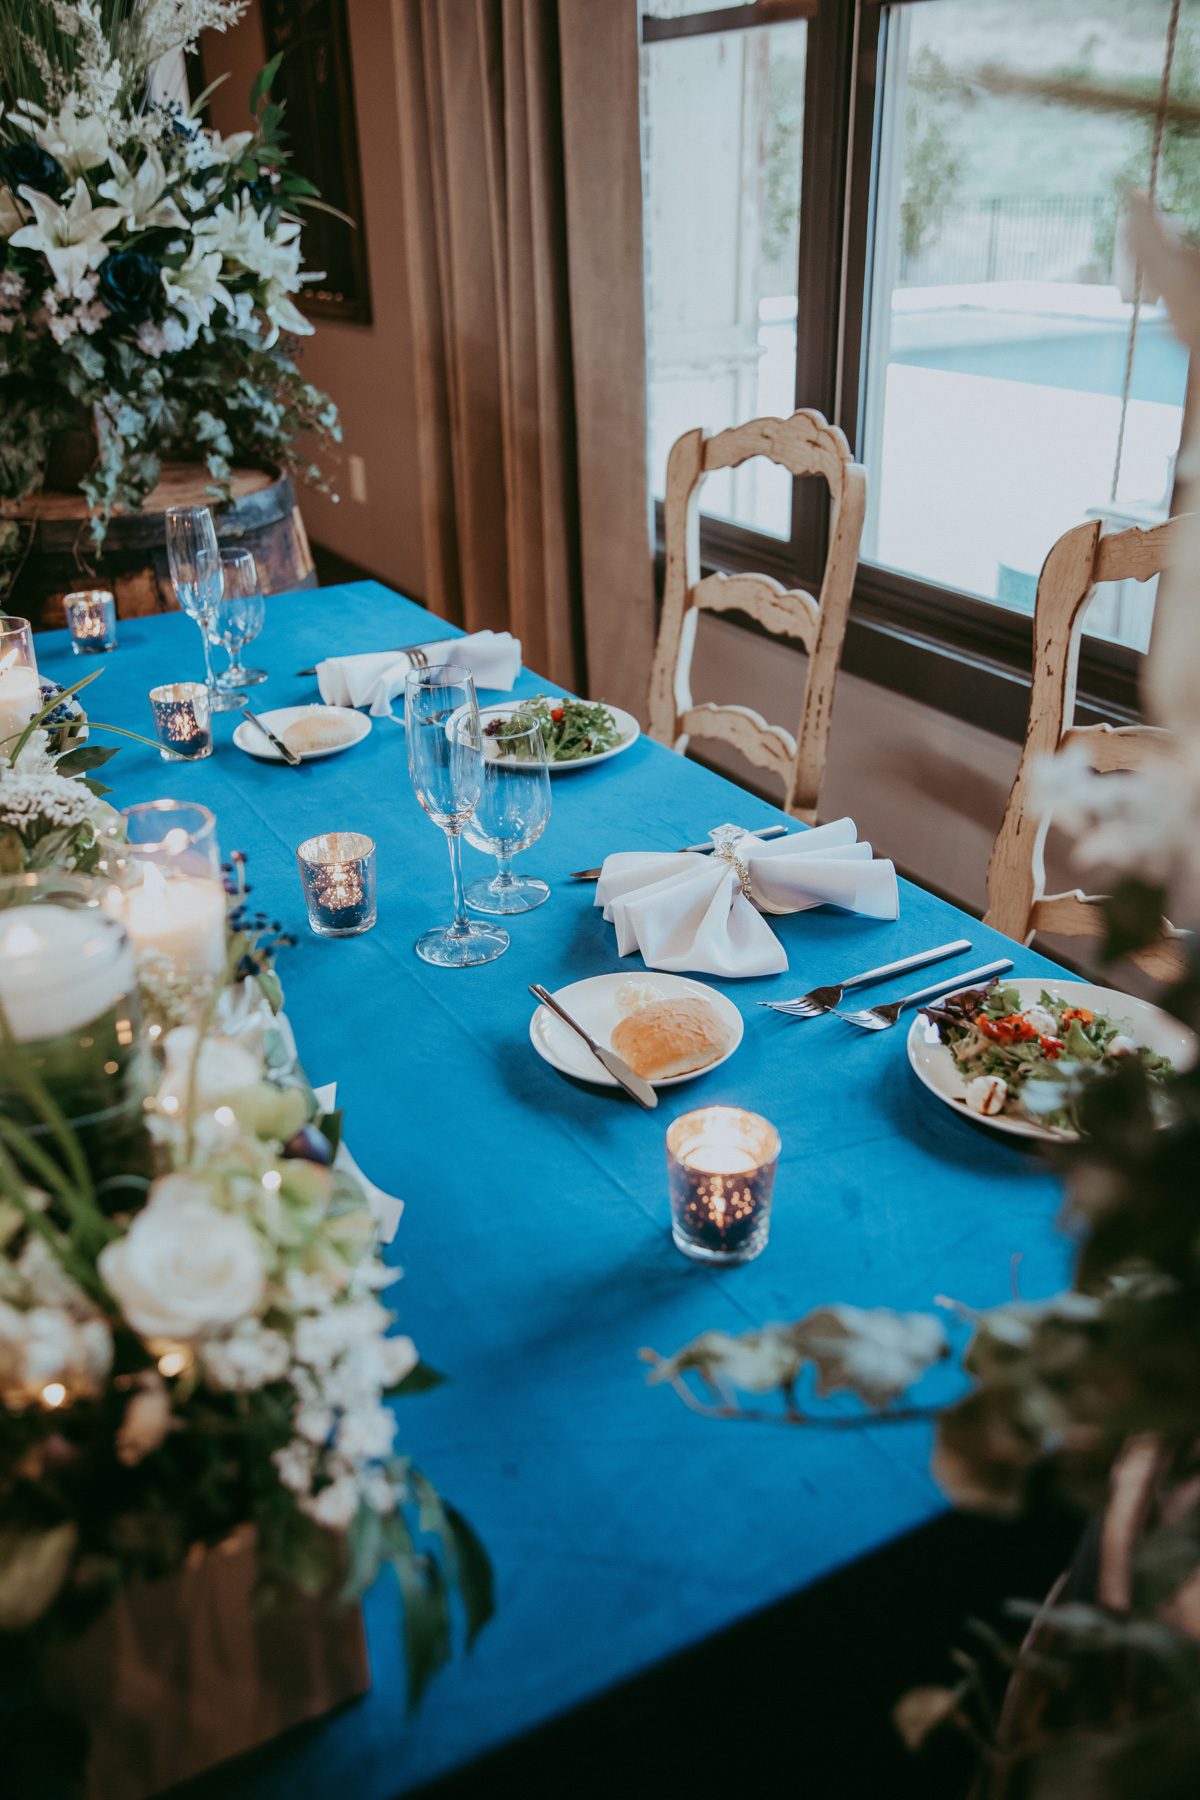 Sweetheart table at wedding recpetion with white flowers and blue linens 